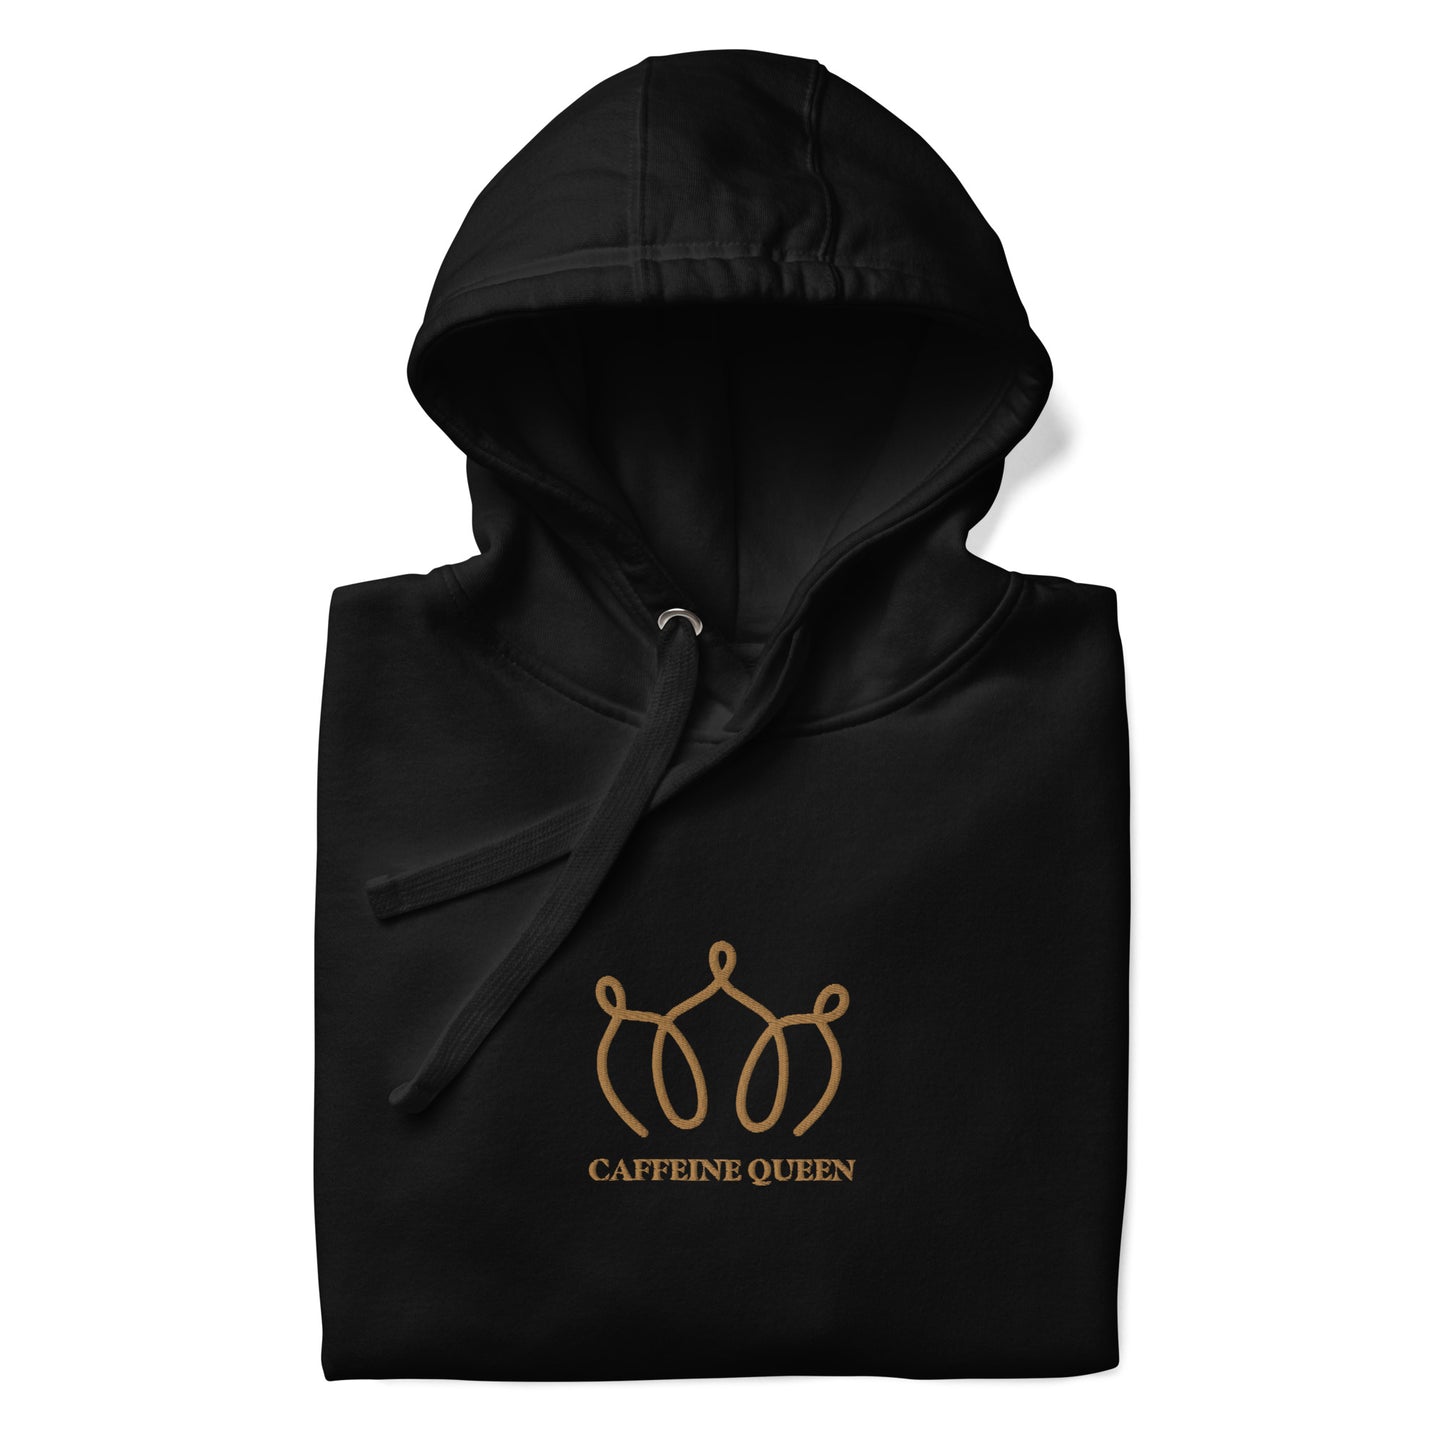 Close up of a folded black hoodie with an embroidered crown and Caffeine Queen text on the front.